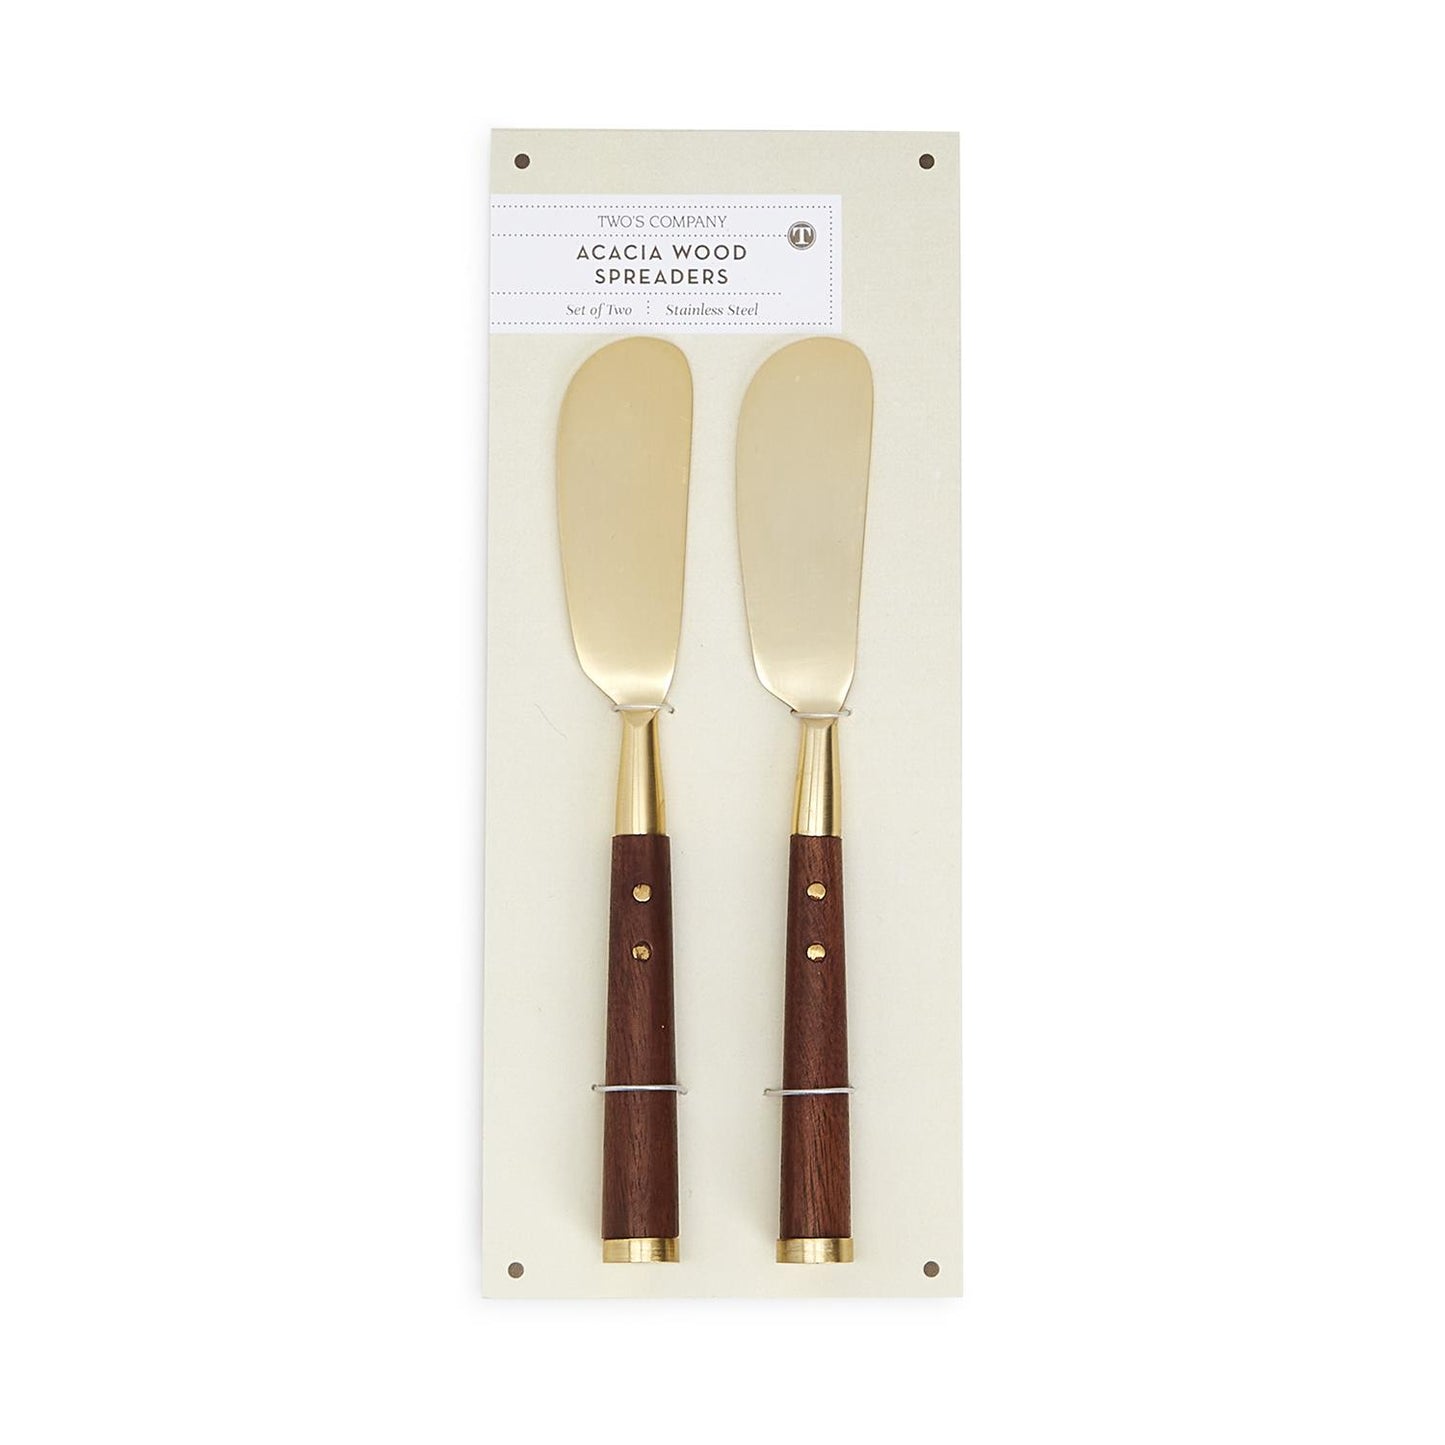 Acacia Wood Set of 2 Spreaders on Gift Card